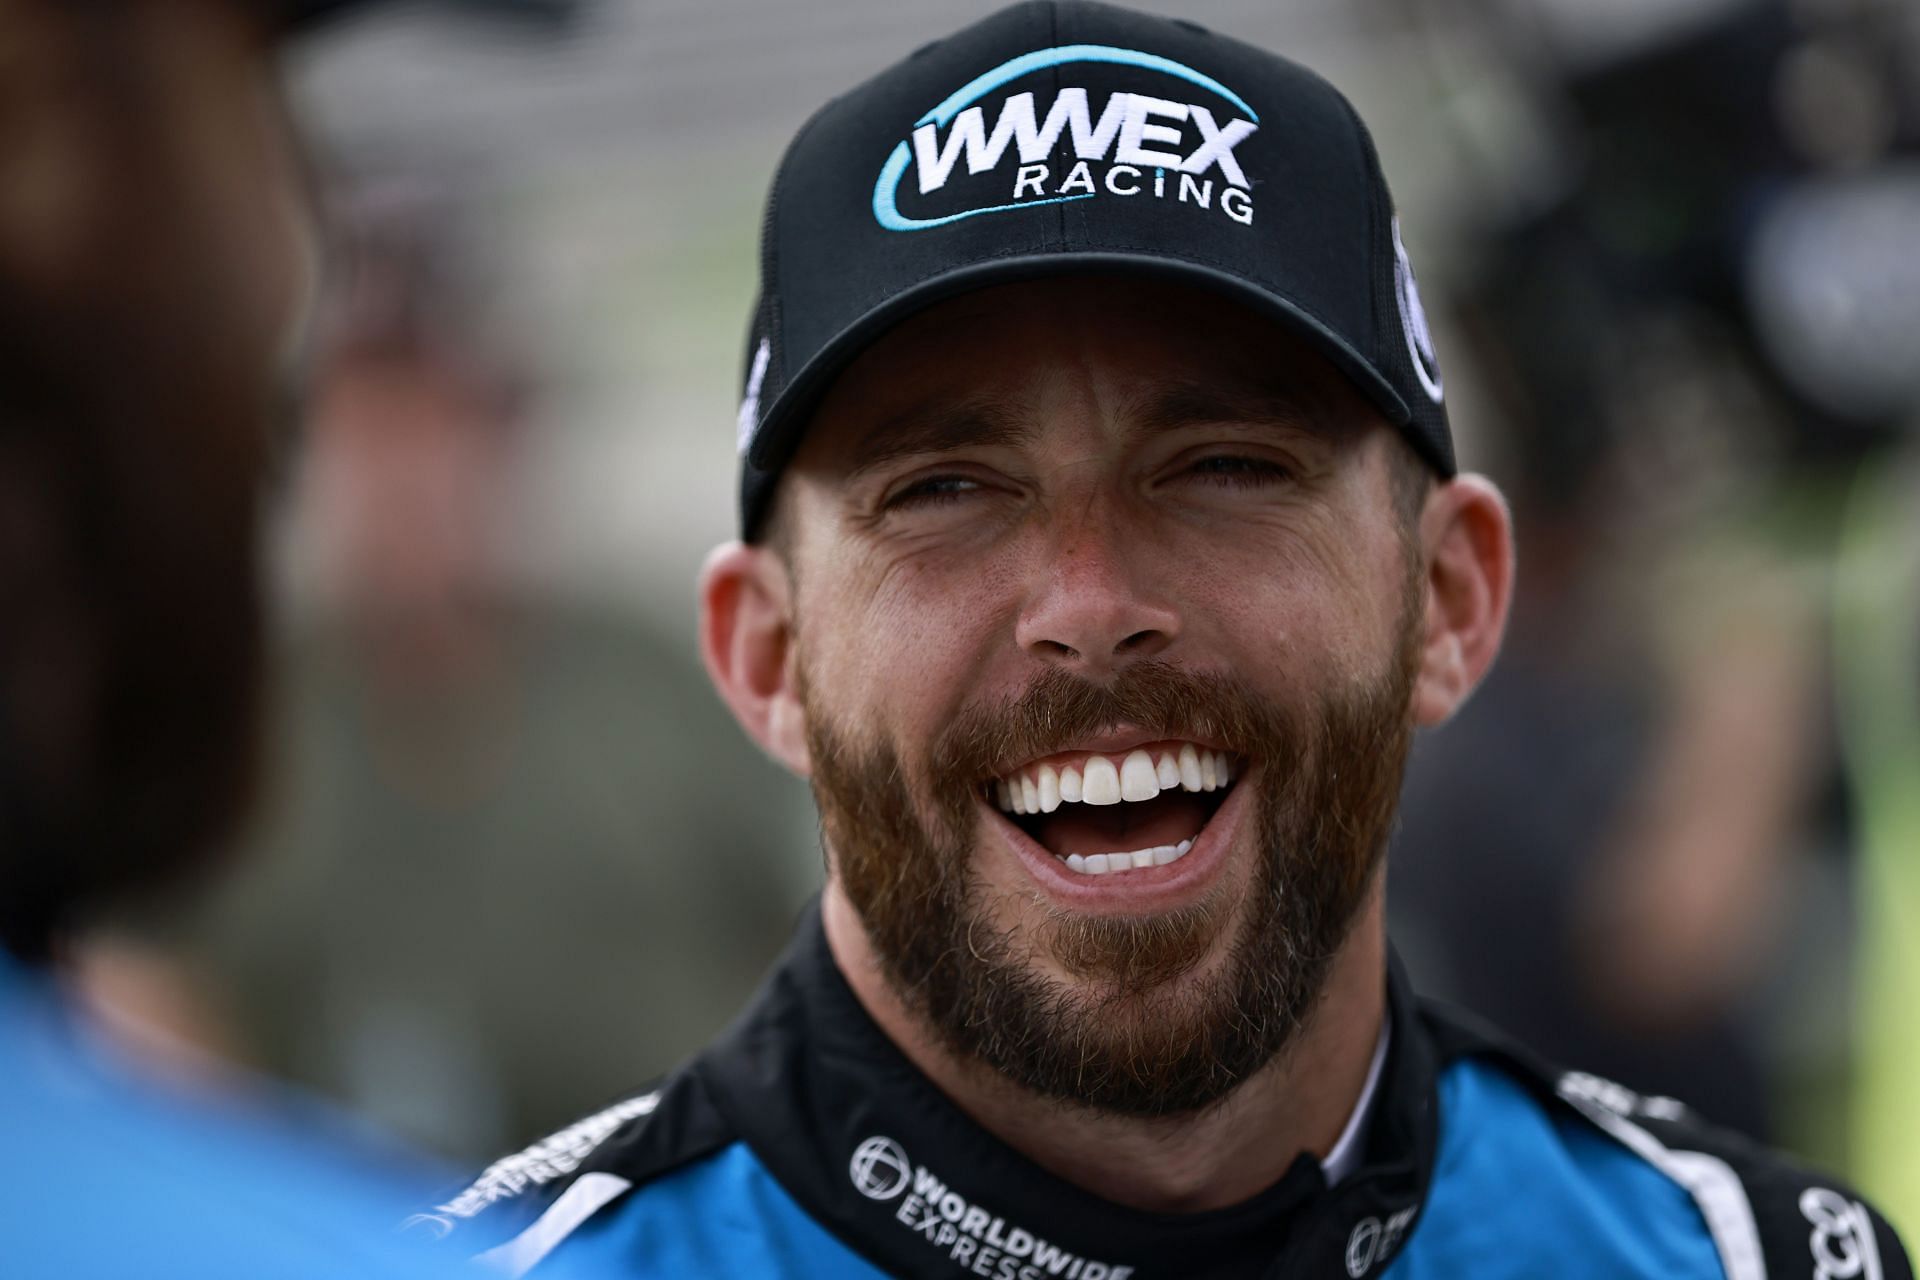 Ross Chastain shares a laugh with crew during qualifying for the NASCAR Cup Series All-Star Race at Texas Motor Speedway